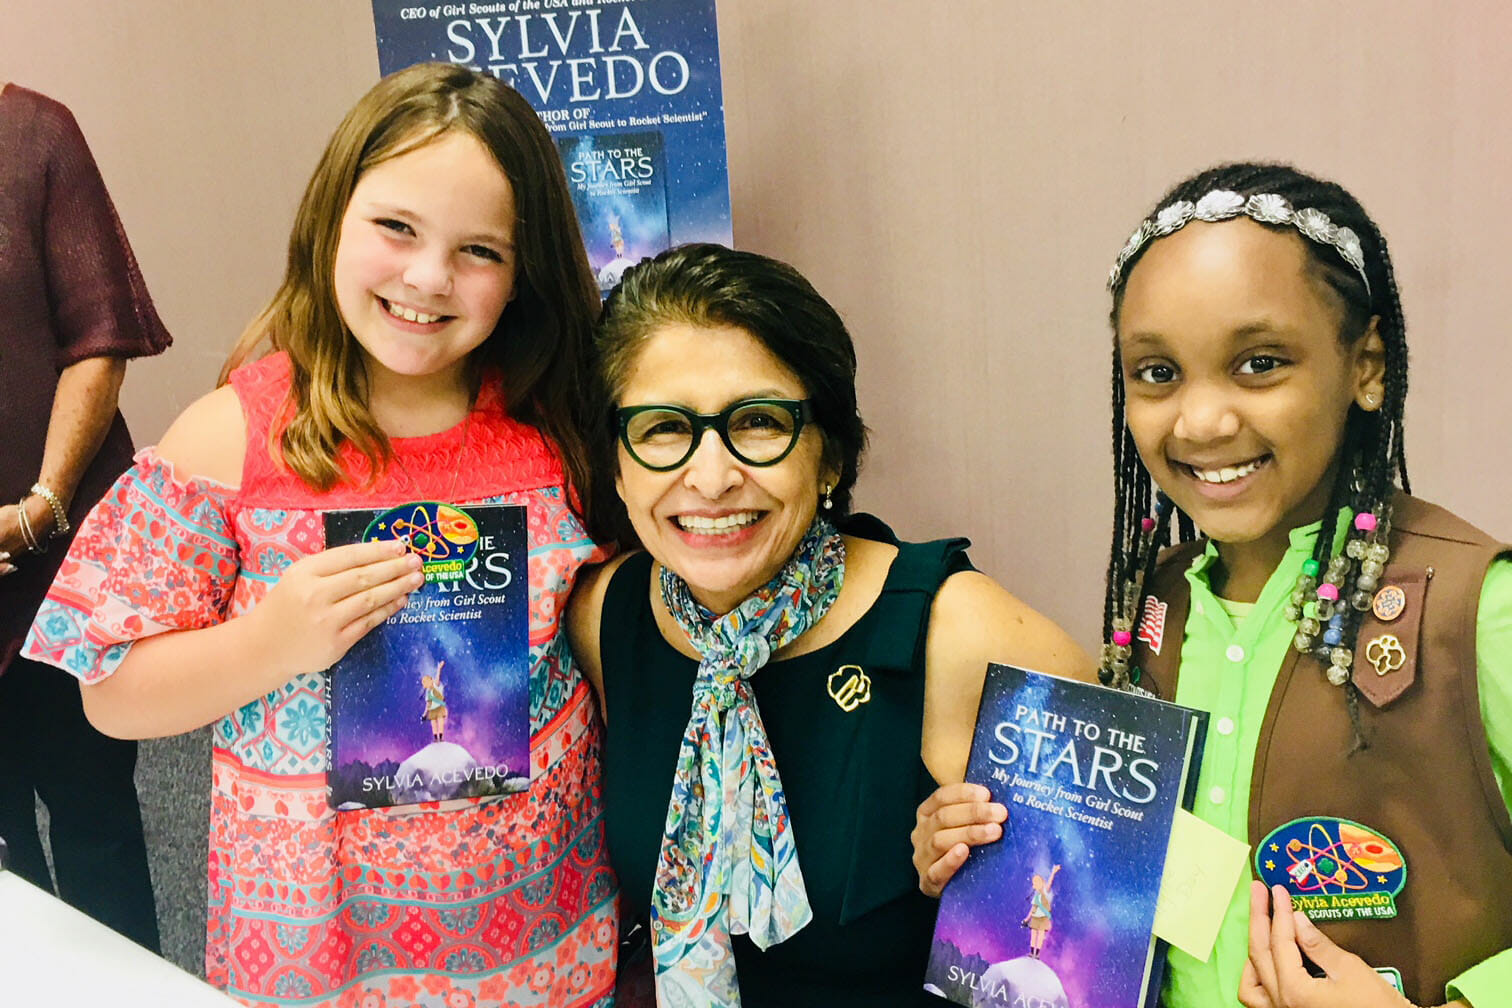 Beasley Girls Scouts with Girl Scouts CEO at Book Signing